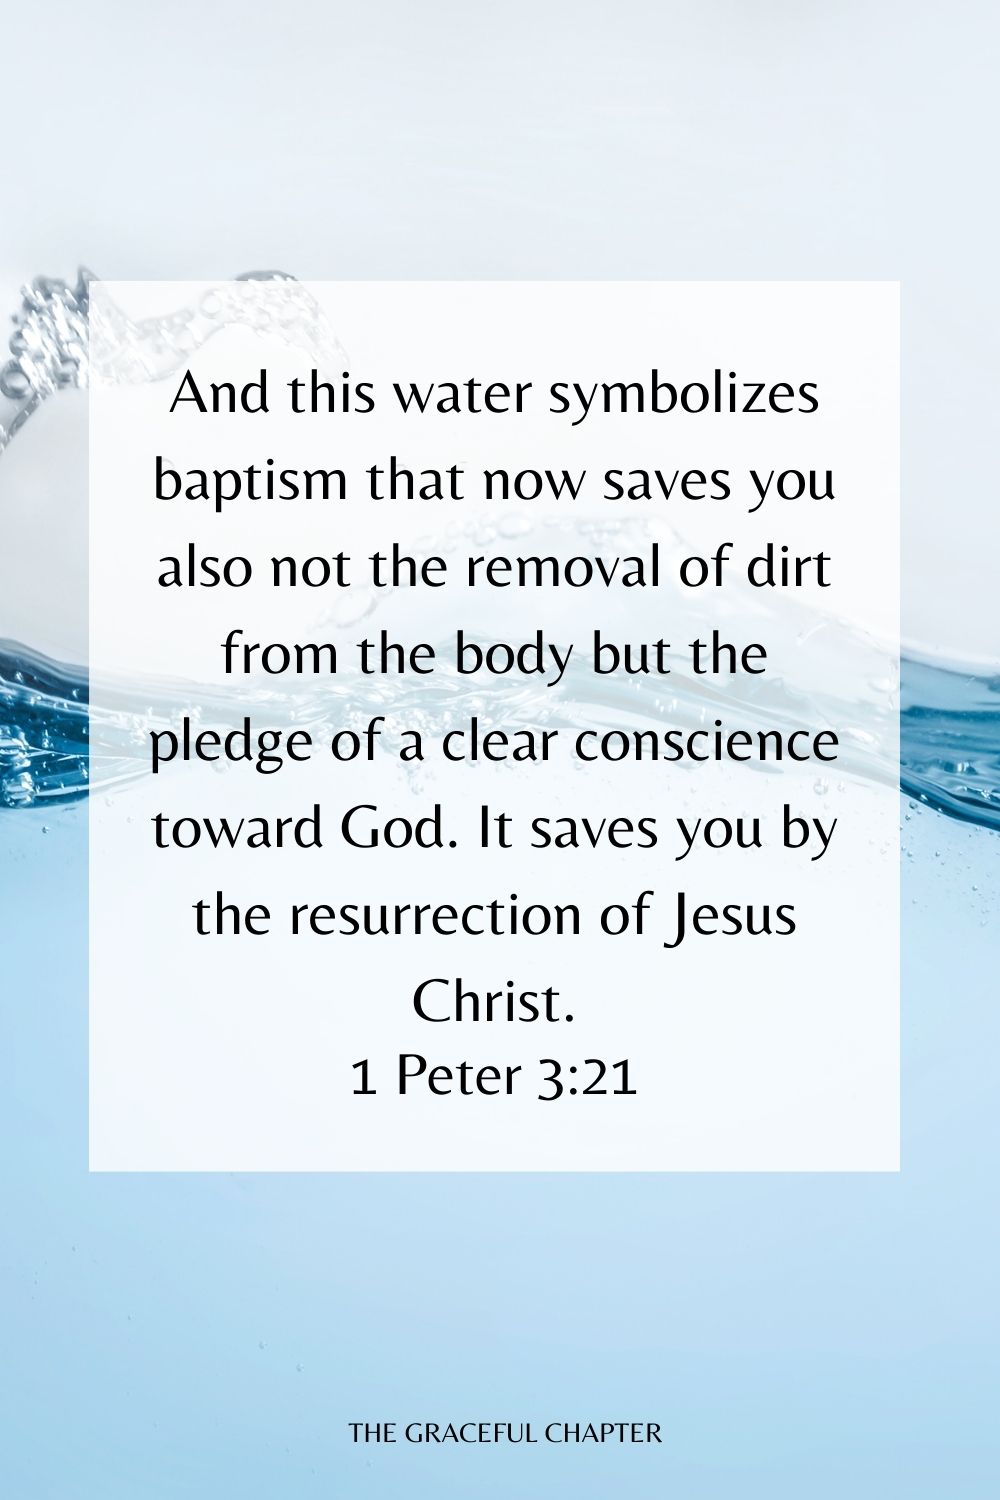 And this water symbolizes baptism that now saves you also not the removal of dirt from the body but the pledge of a clear conscience toward God. It saves you by the resurrection of Jesus Christ. 1 Peter 3:21